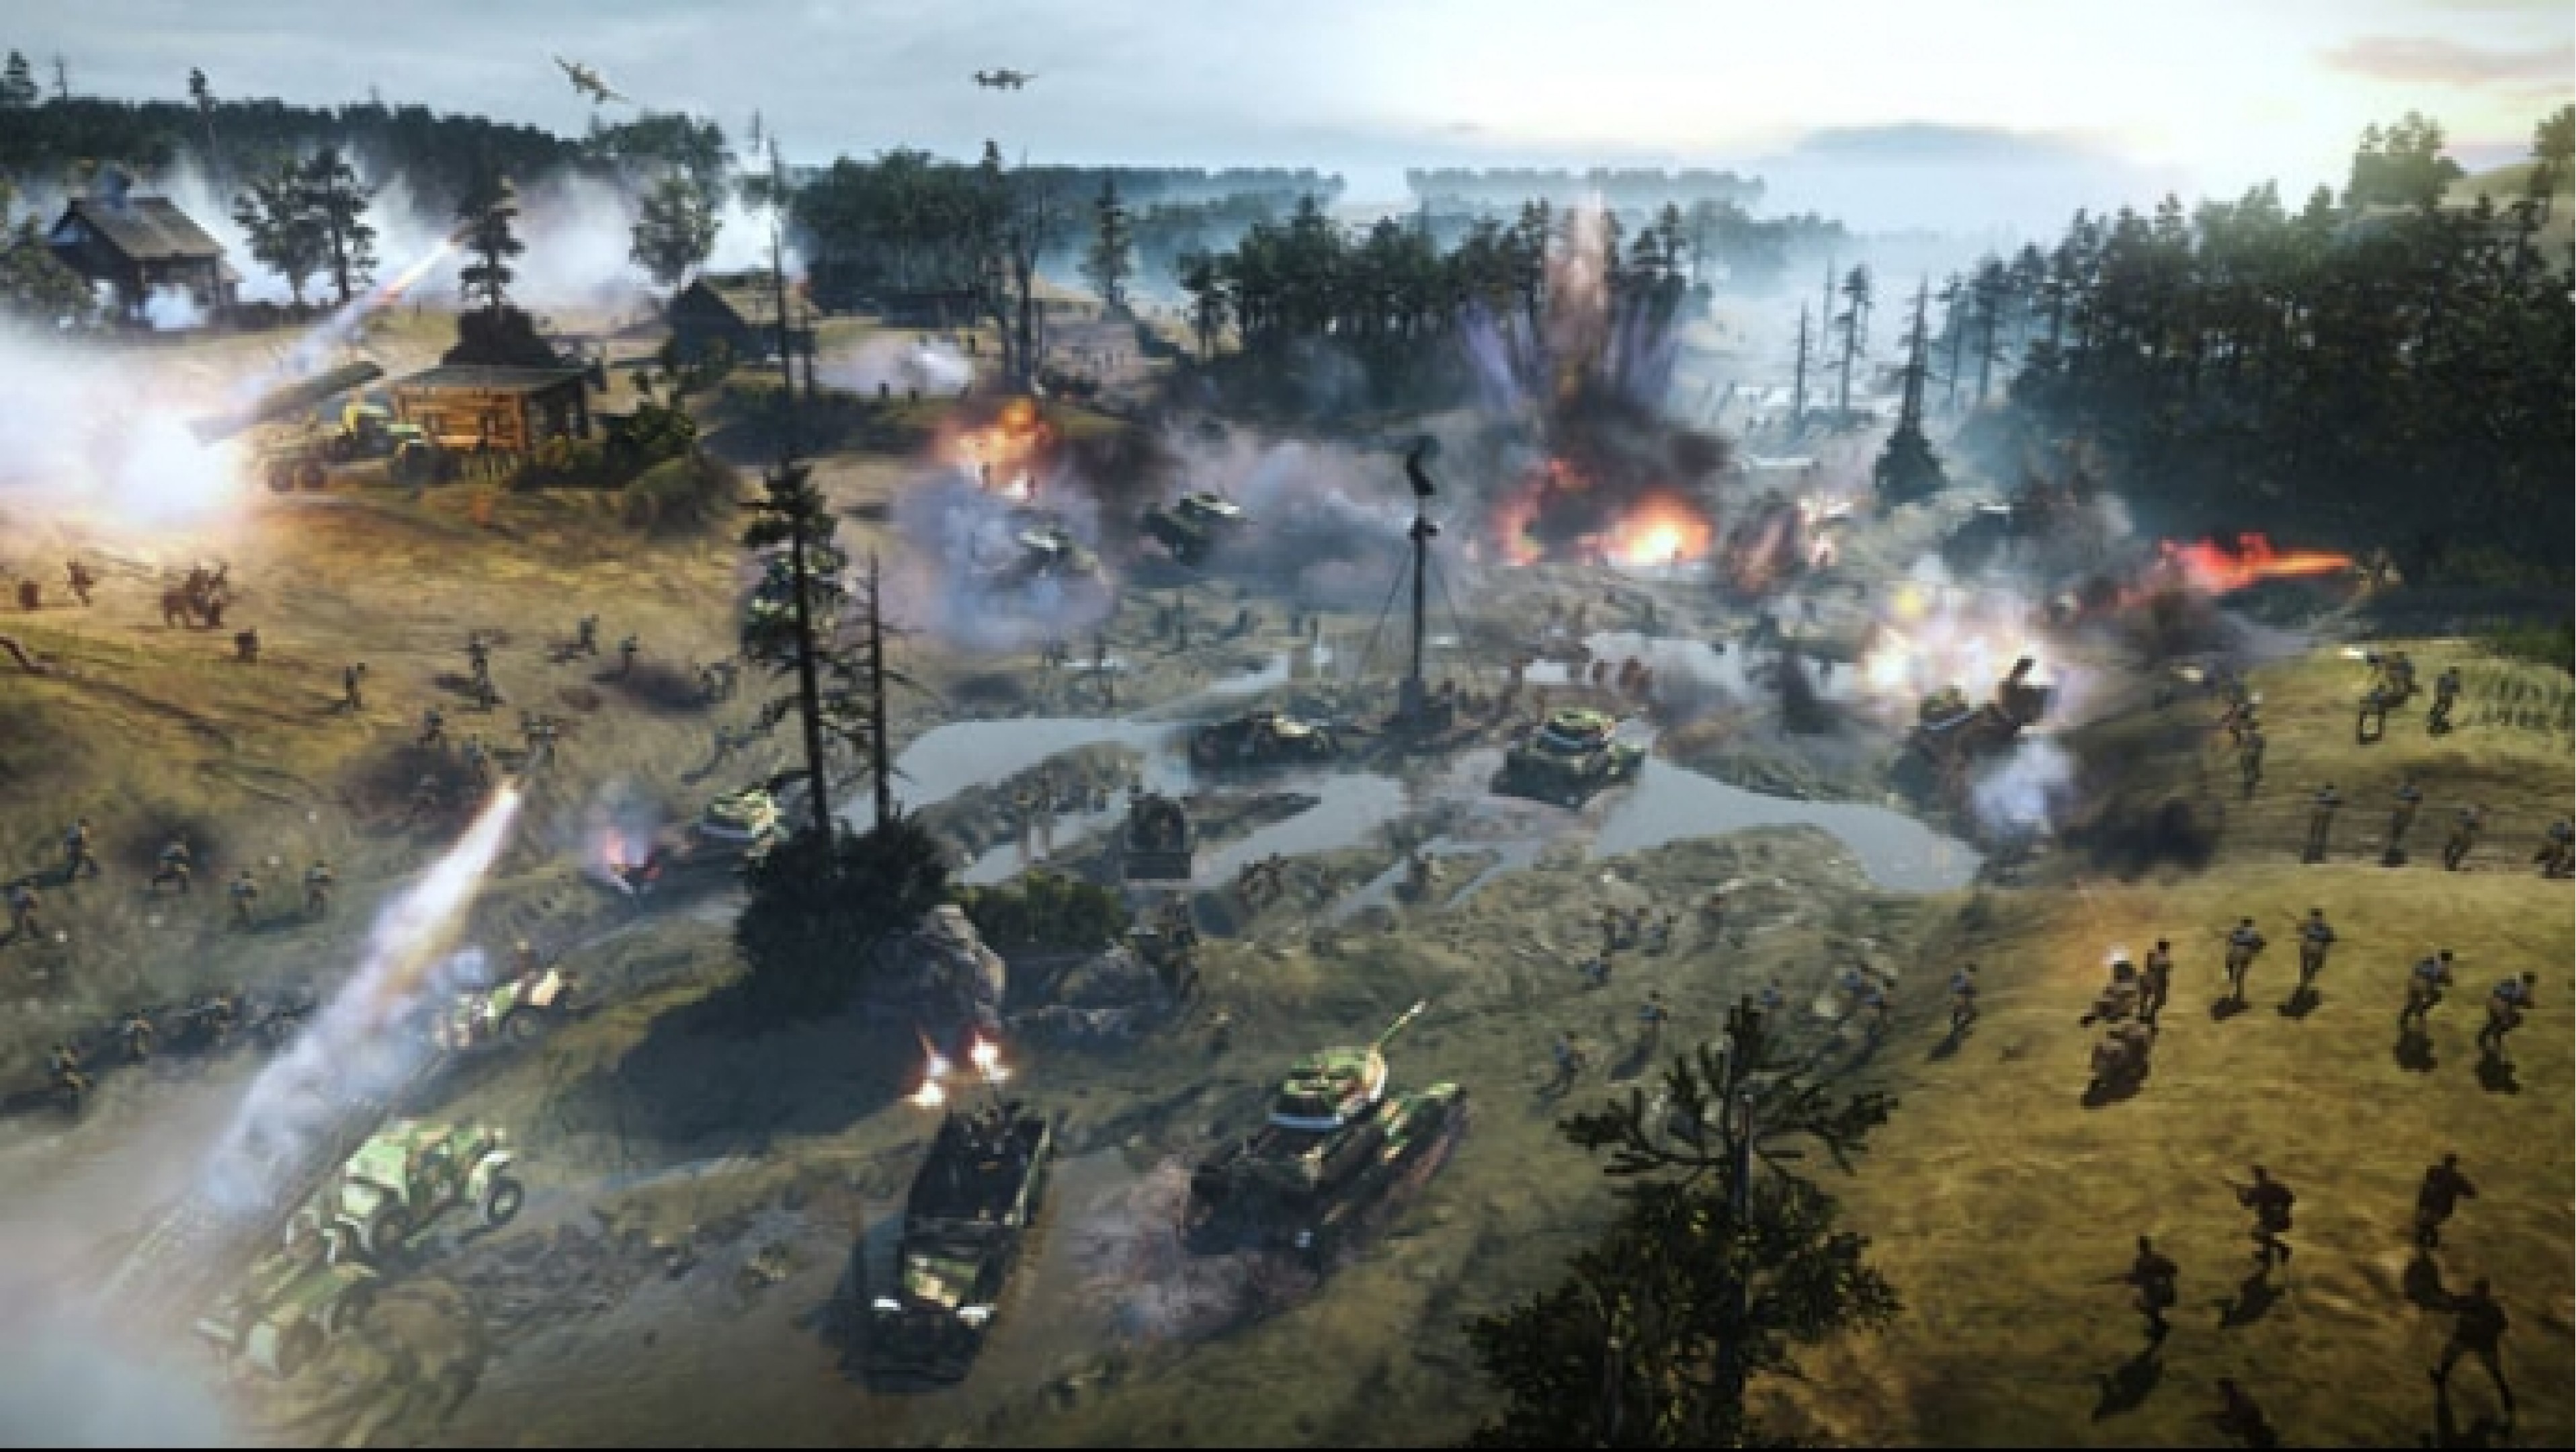 company of heroes 2 mac free download